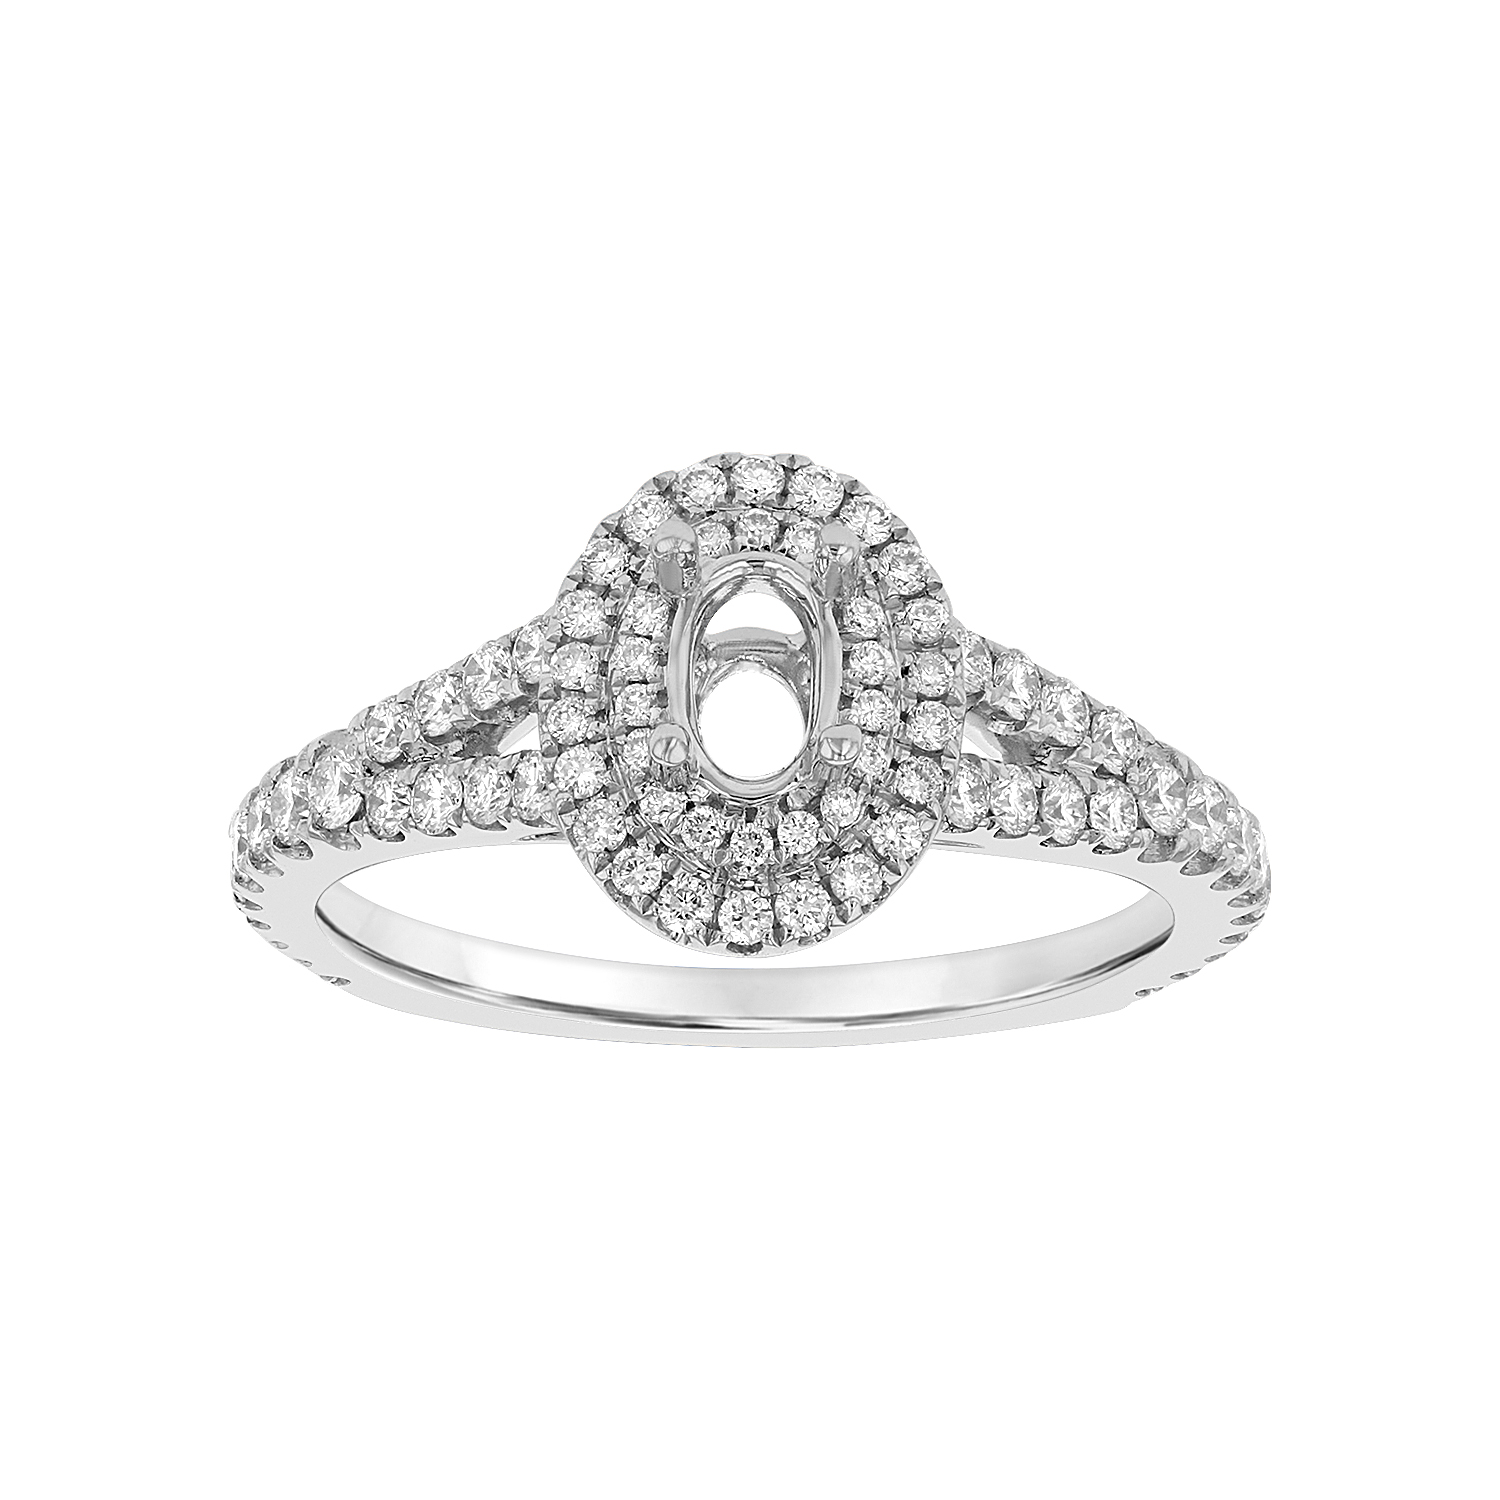 View 0.58ctw Diamond Semi Mount Engagement Ring in 18k White Gold